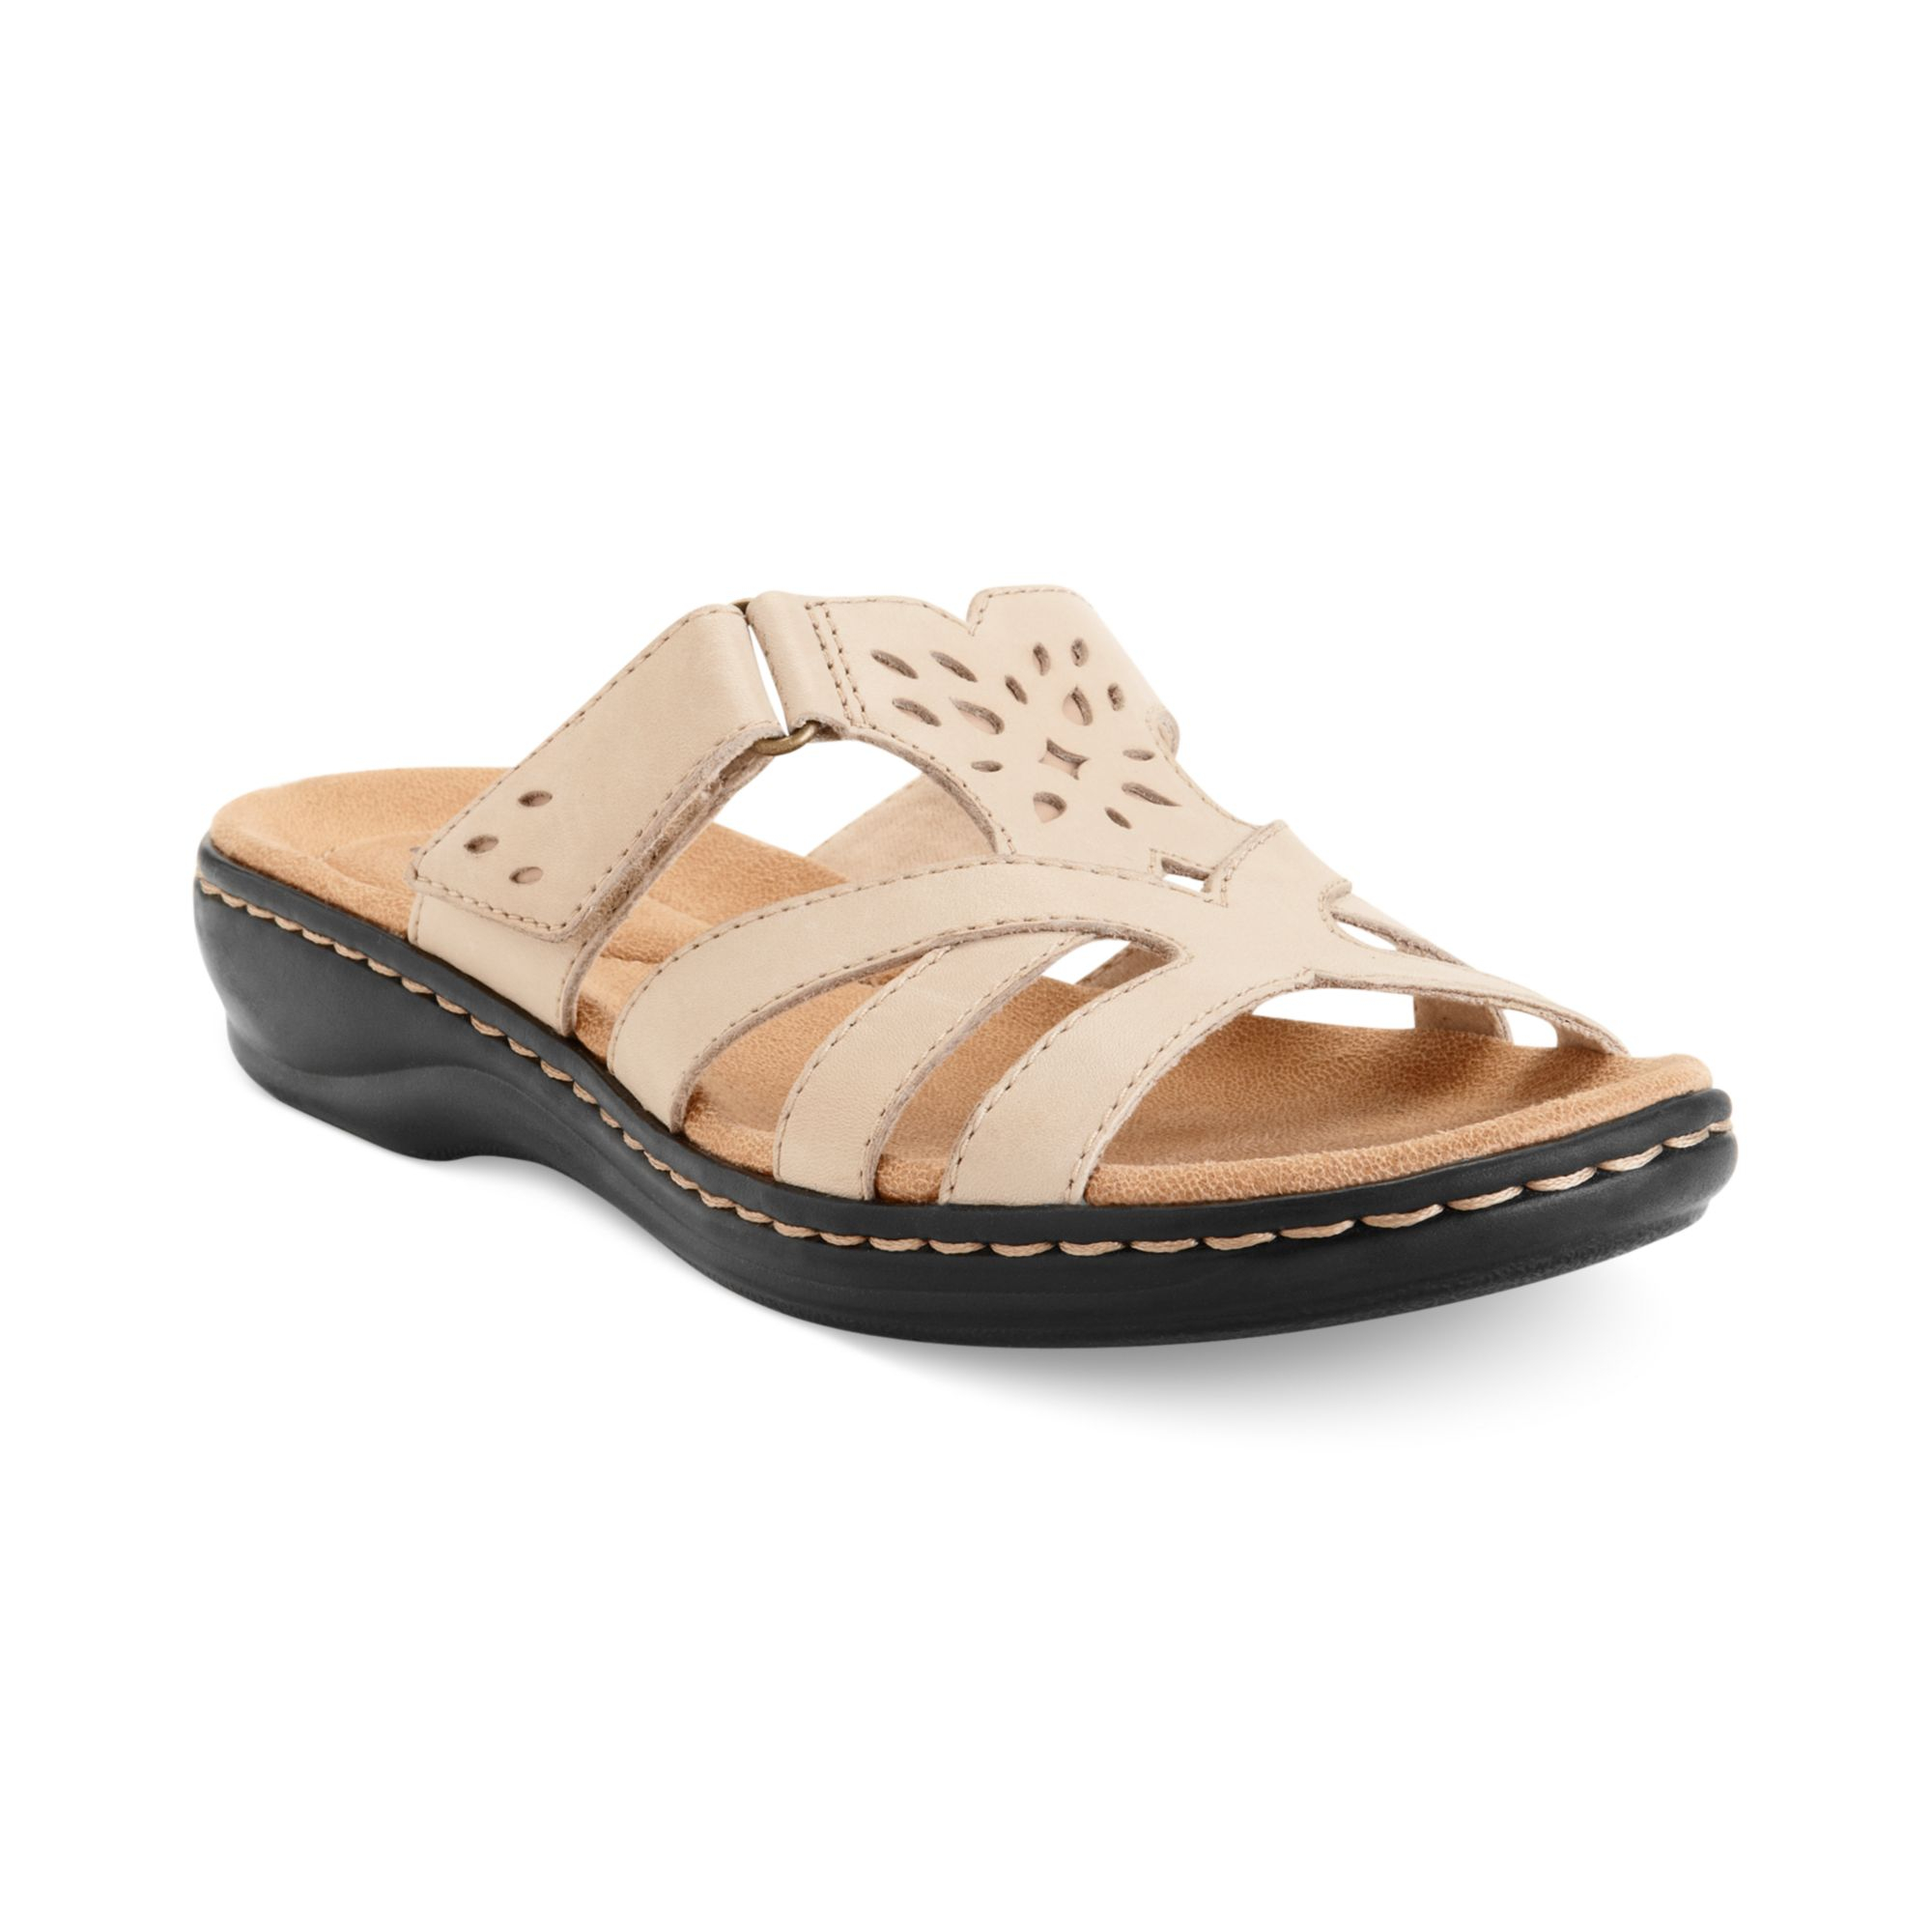 Clarks Womens Shoes Leisa Plum Sandals  in Nude Natural 